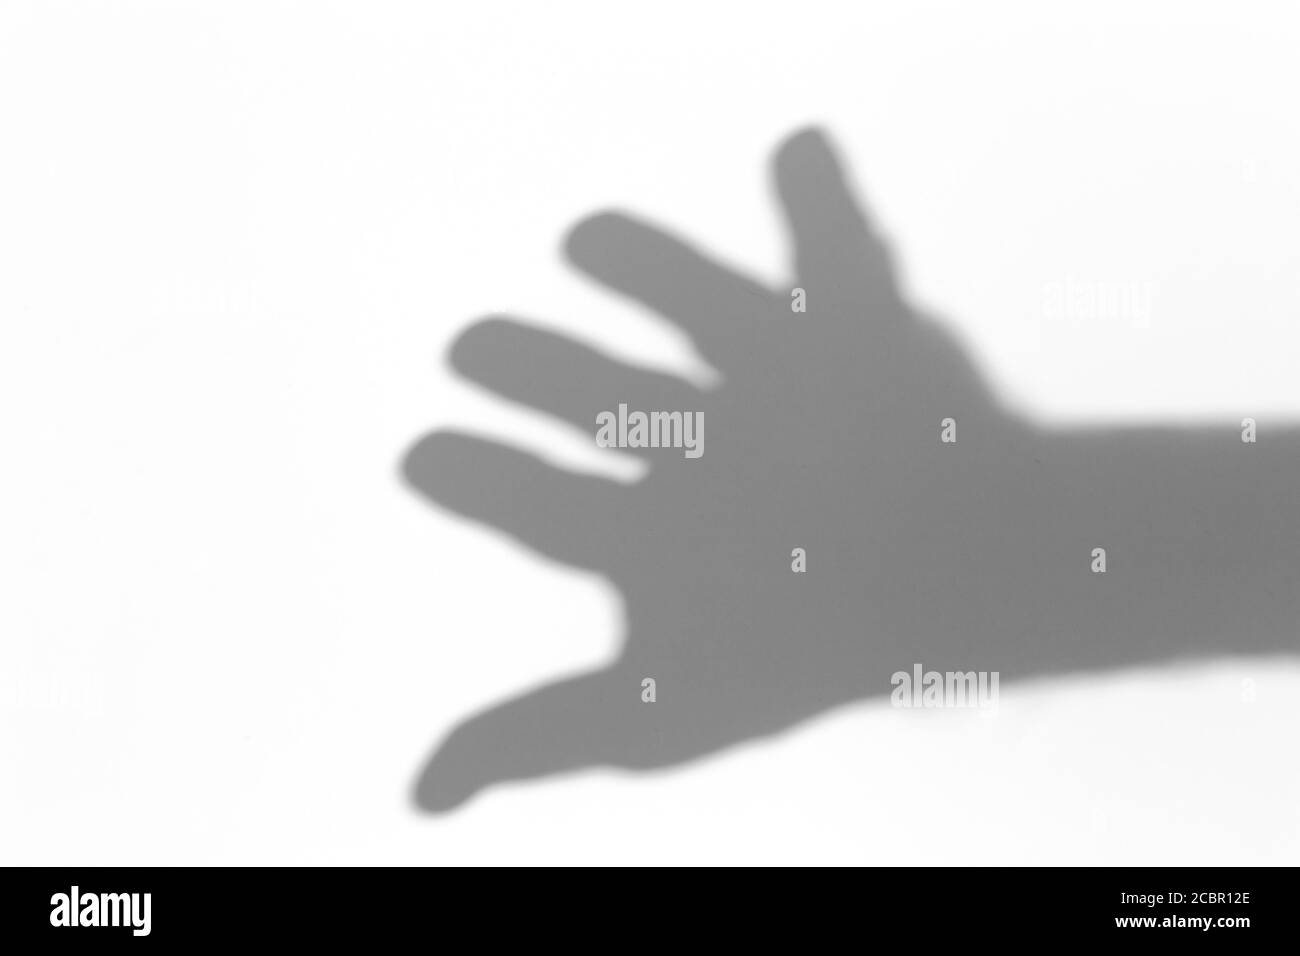 Shadow overlay effect for photo. Shadows from hand palms on white light wall in sunlight. Stock Photo